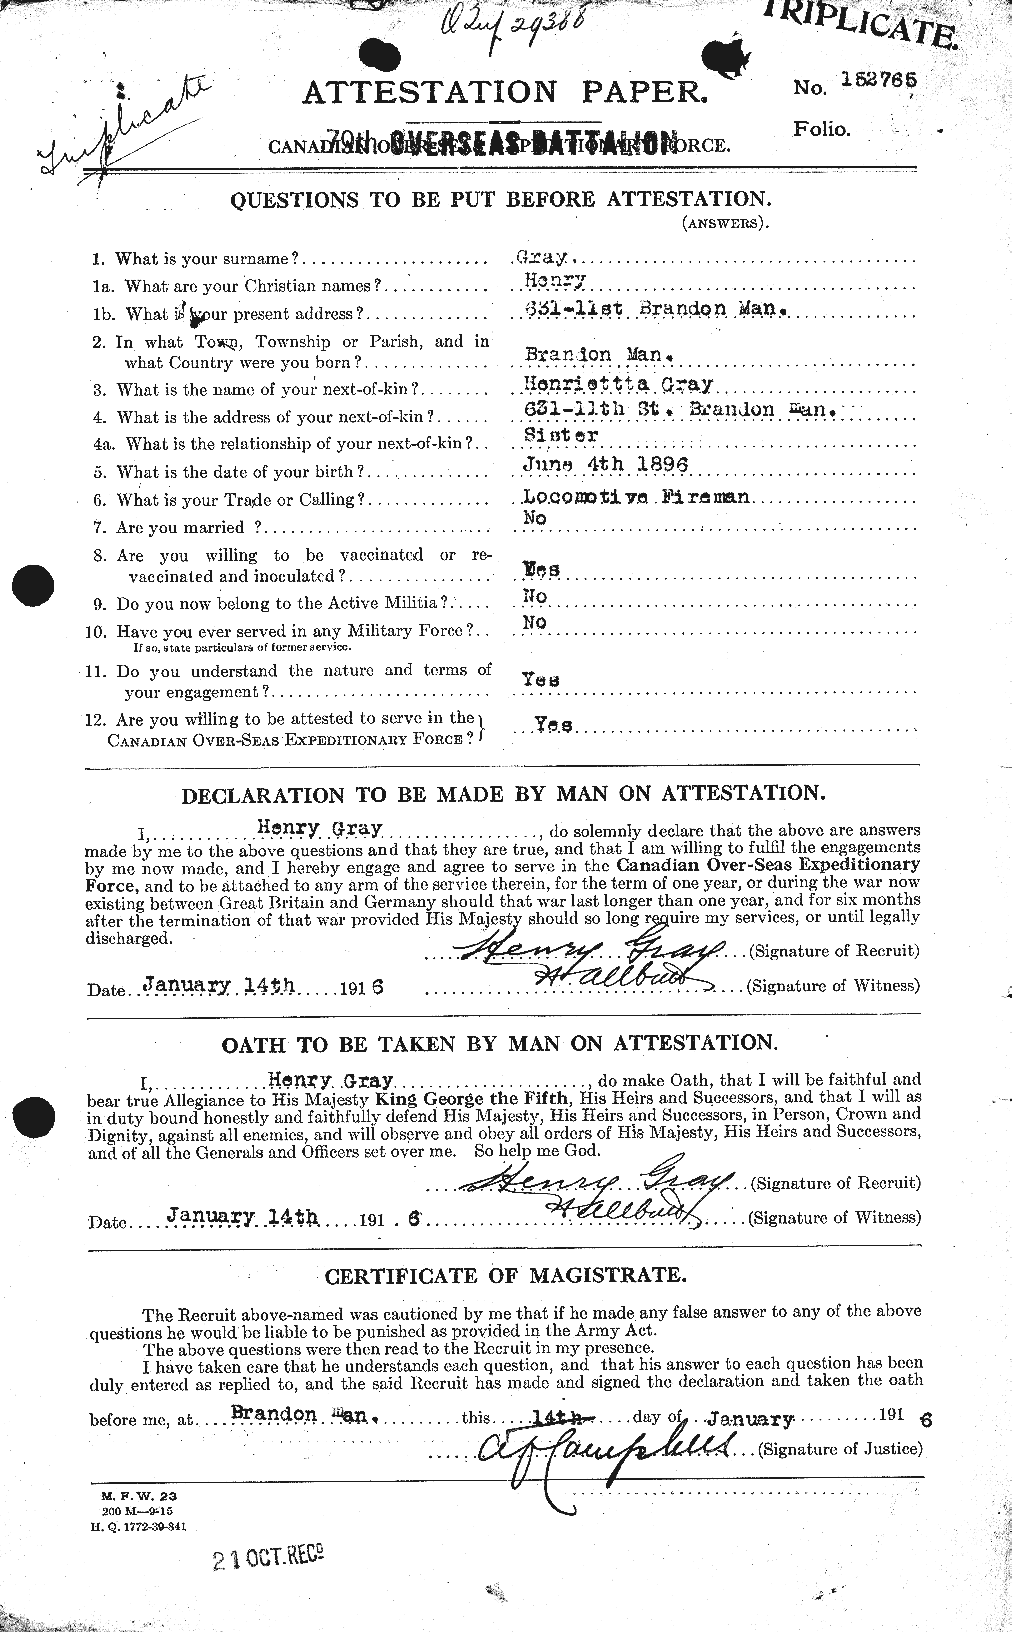 Personnel Records of the First World War - CEF 363225a